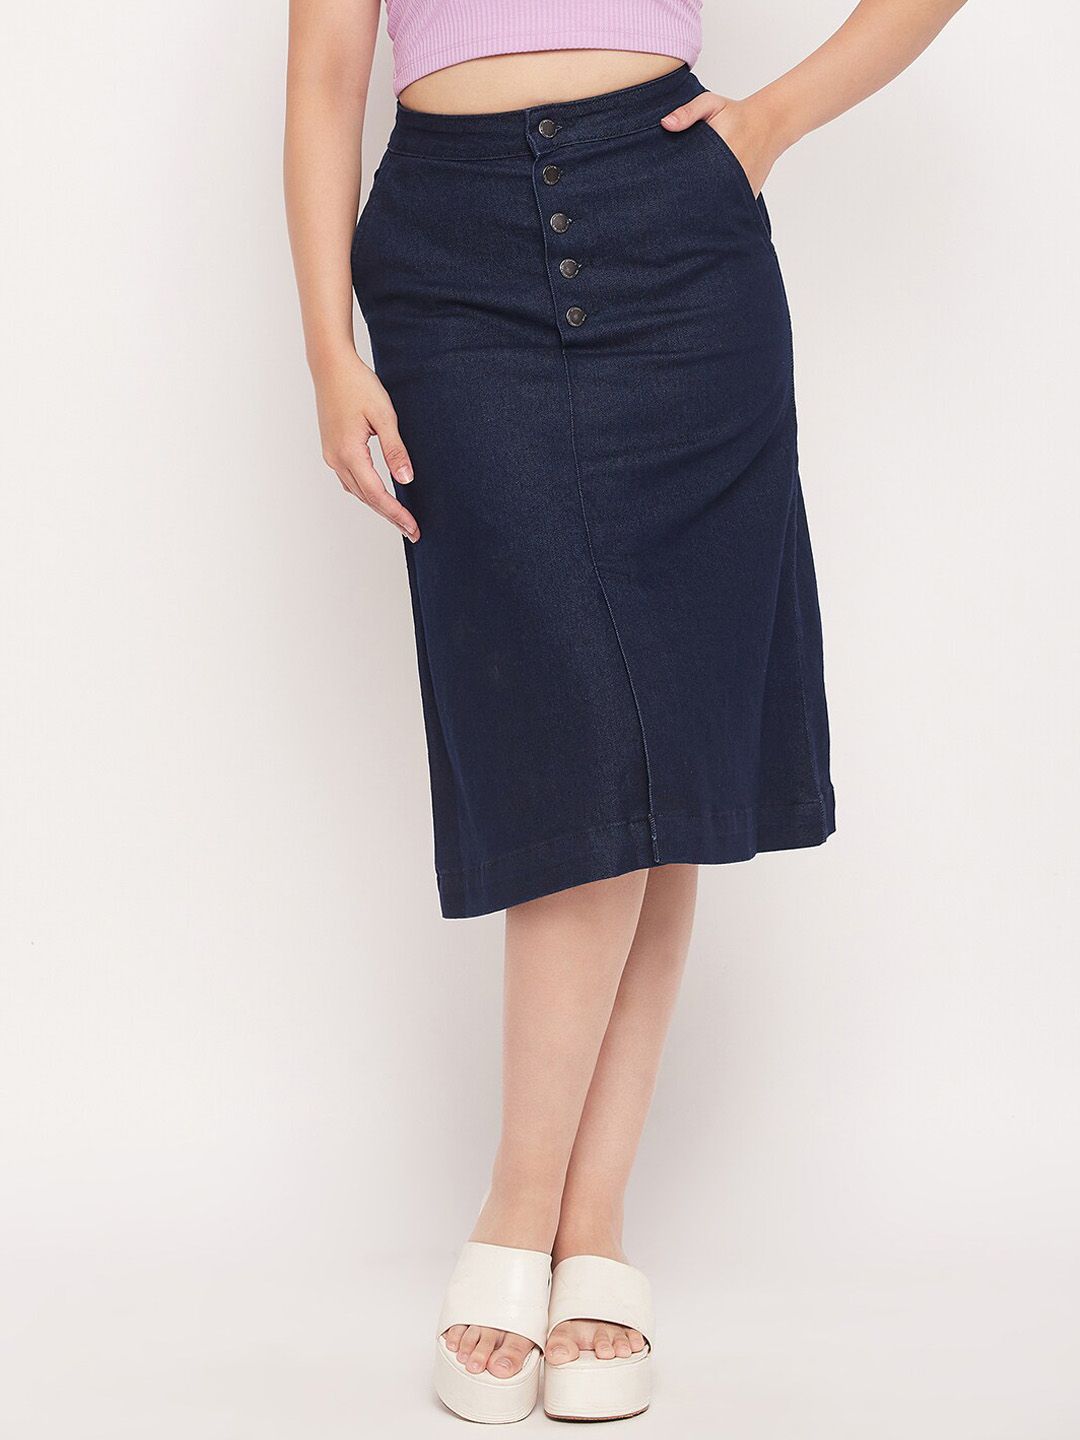 Madame A Line Denim Cotton Knee Length Skirt Price in India